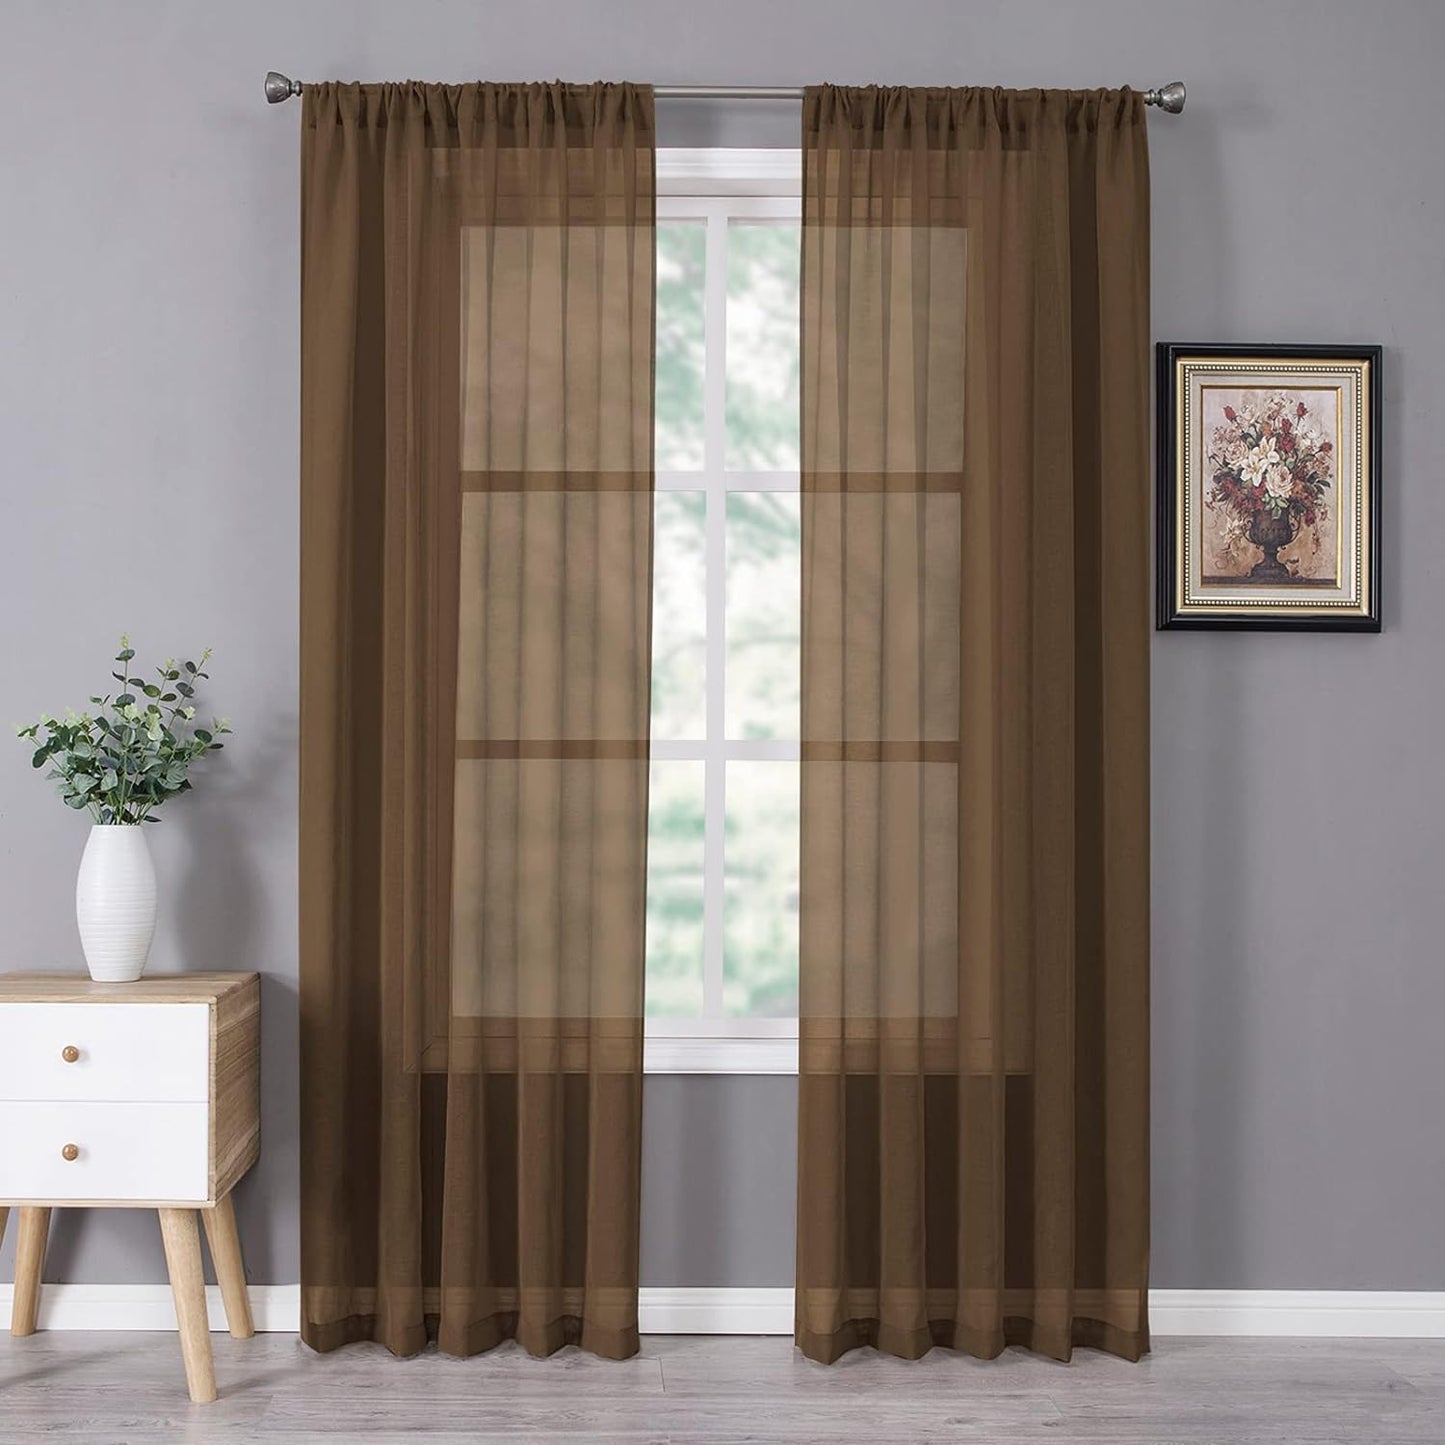 Tollpiz Short Sheer Curtains Linen Textured Bedroom Curtain Sheers Light Filtering Rod Pocket Voile Curtains for Living Room, 54 X 45 Inches Long, White, Set of 2 Panels  Tollpiz Tex Brown 54"W X 72"L 